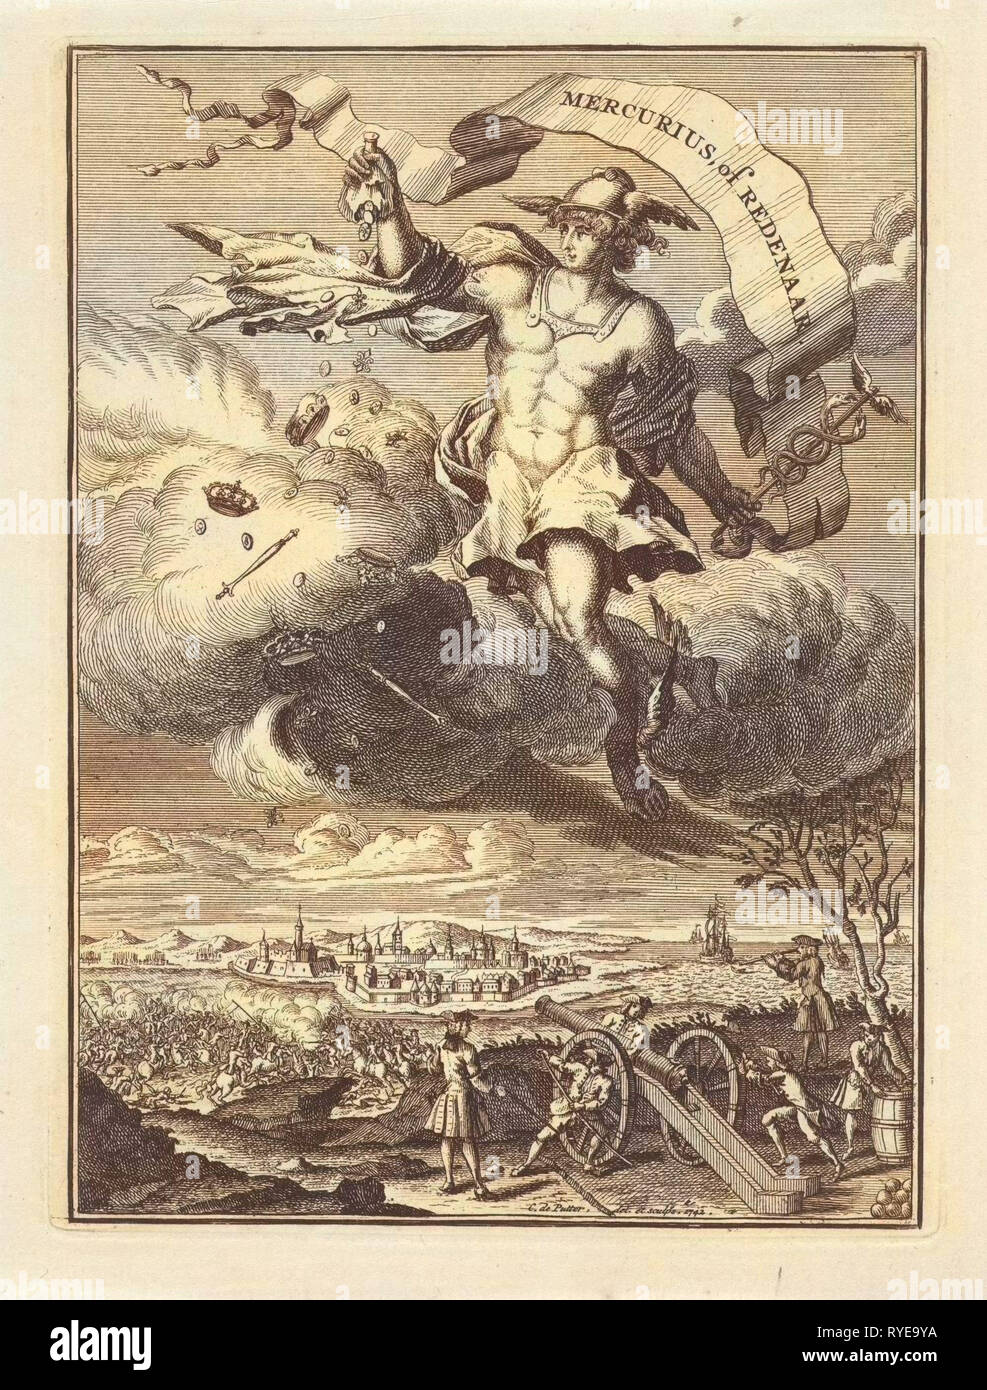 Title page of Mercury or orator, Coenraad de Putter, 1742 Stock Photo